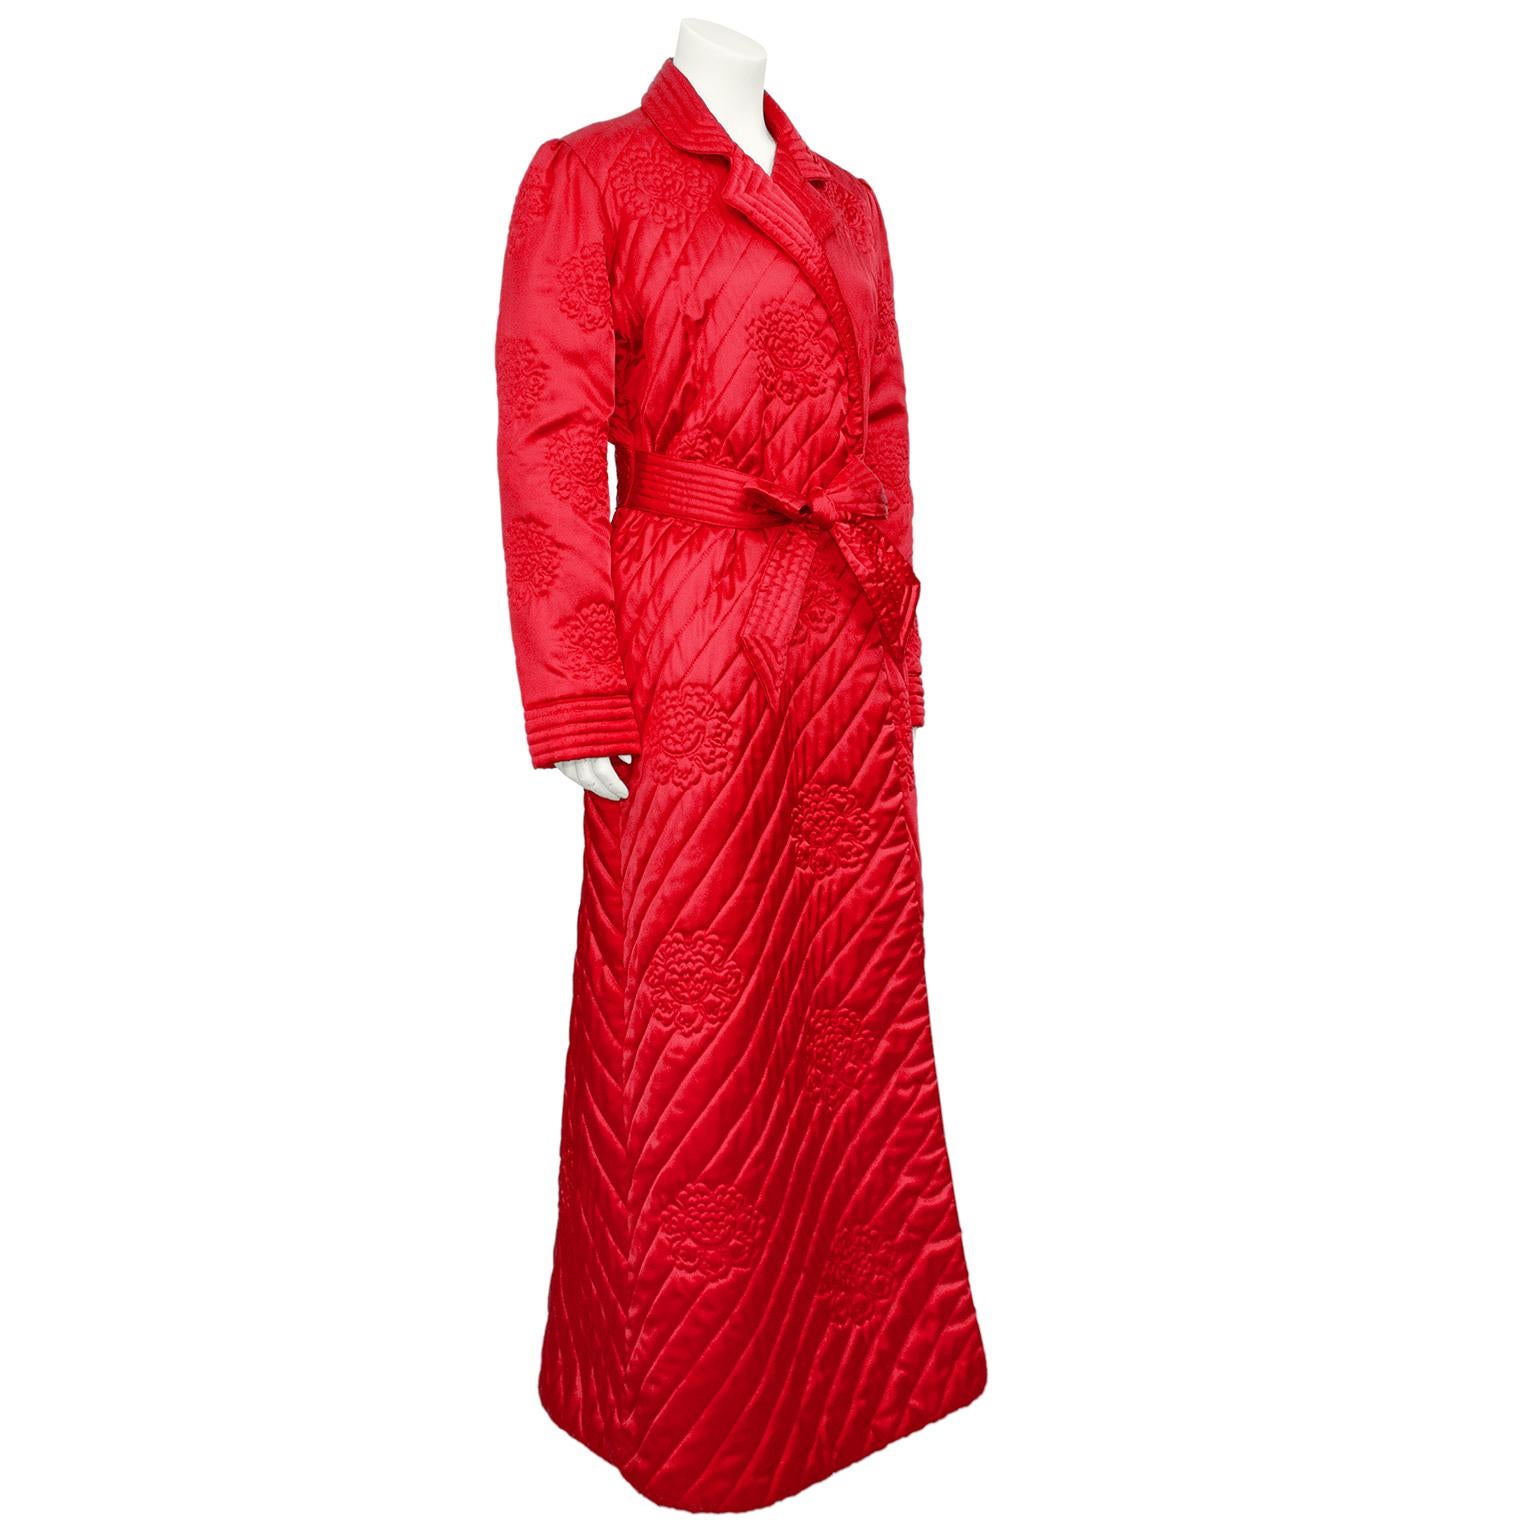 Fabulous Christian Dior red lounge robe from the 1980s. Diagonally quilted with large quilted lotus flowers and ribbed cuffs. Matching tie belt at waist. Perfect to celebrate the Lunar New Year! Excellent vintage condition. Made in Hong Kong. 100%